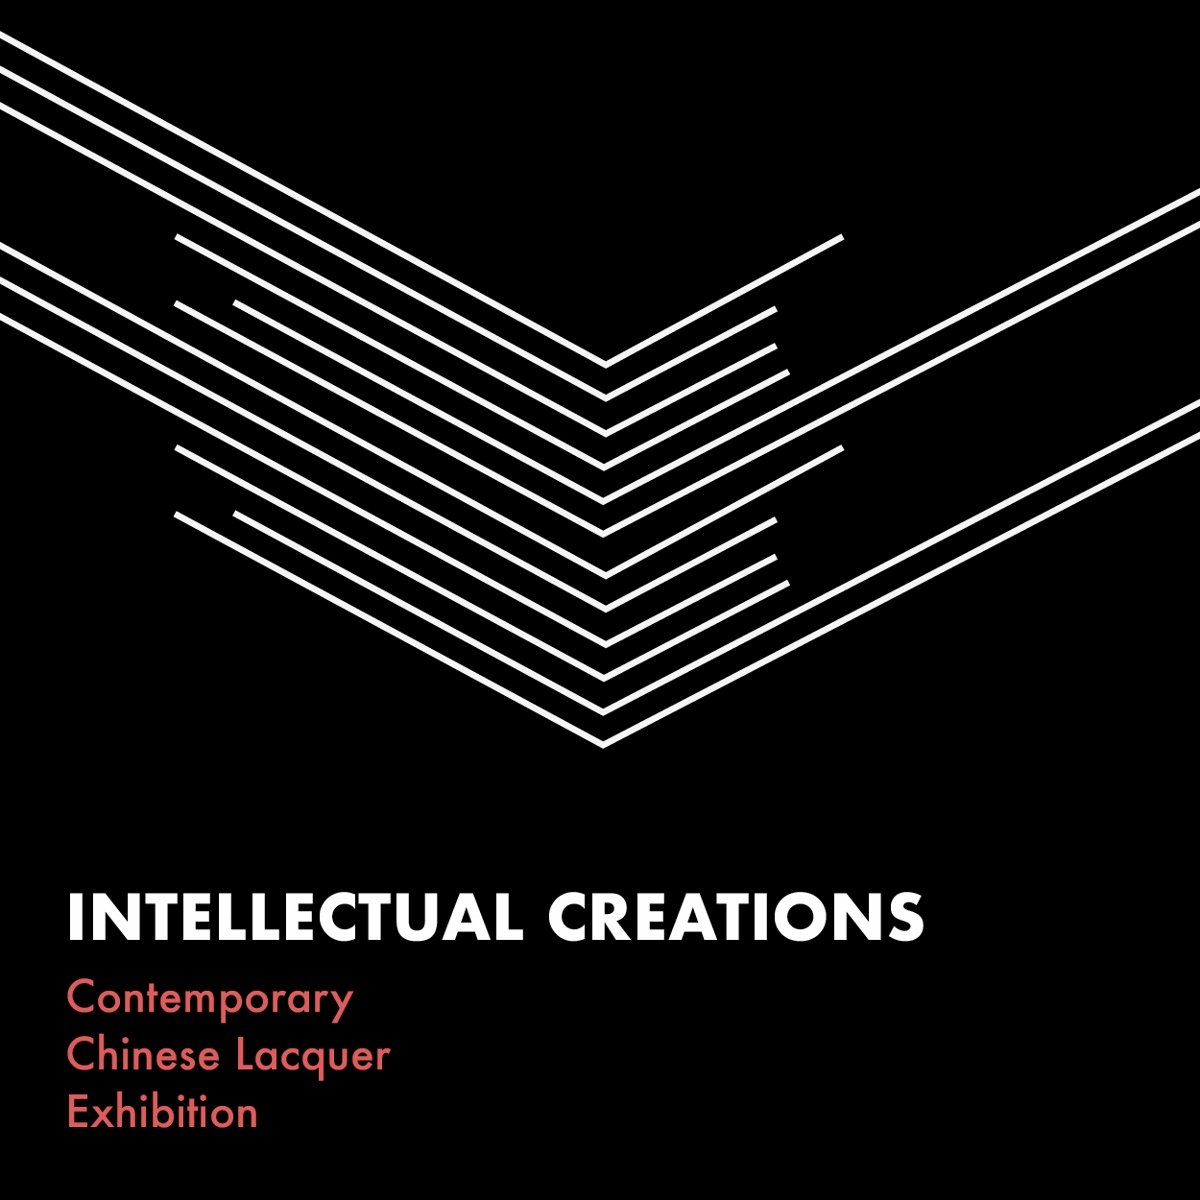 Intellectual Creations. Contemporary Chinese Lacquer Exhibition